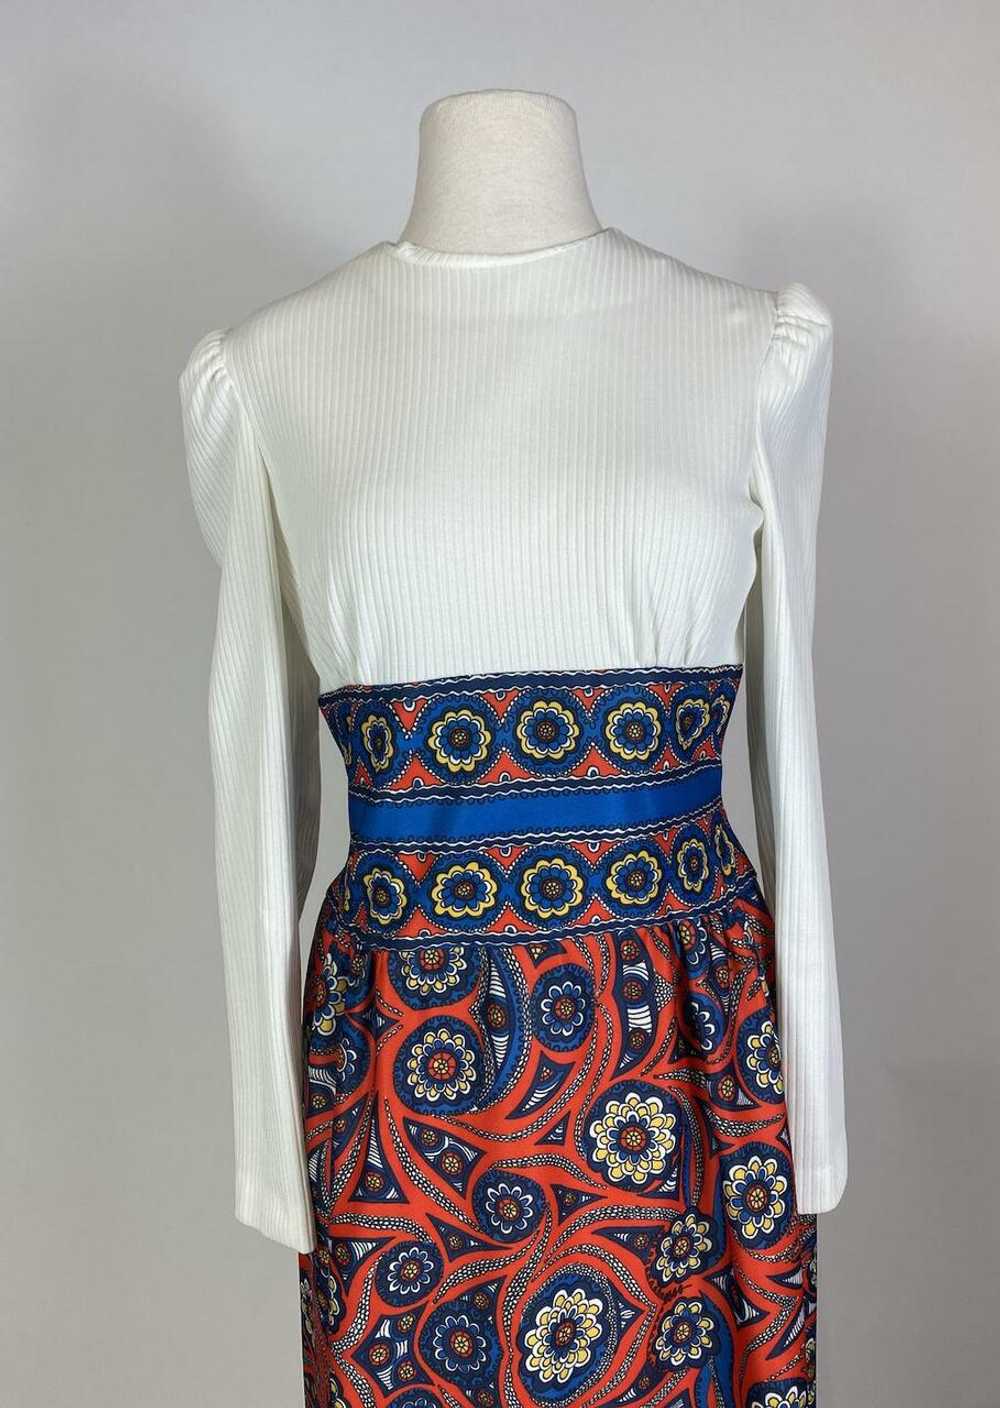 1970s Red Blue Paisley Maxi Dress - image 2